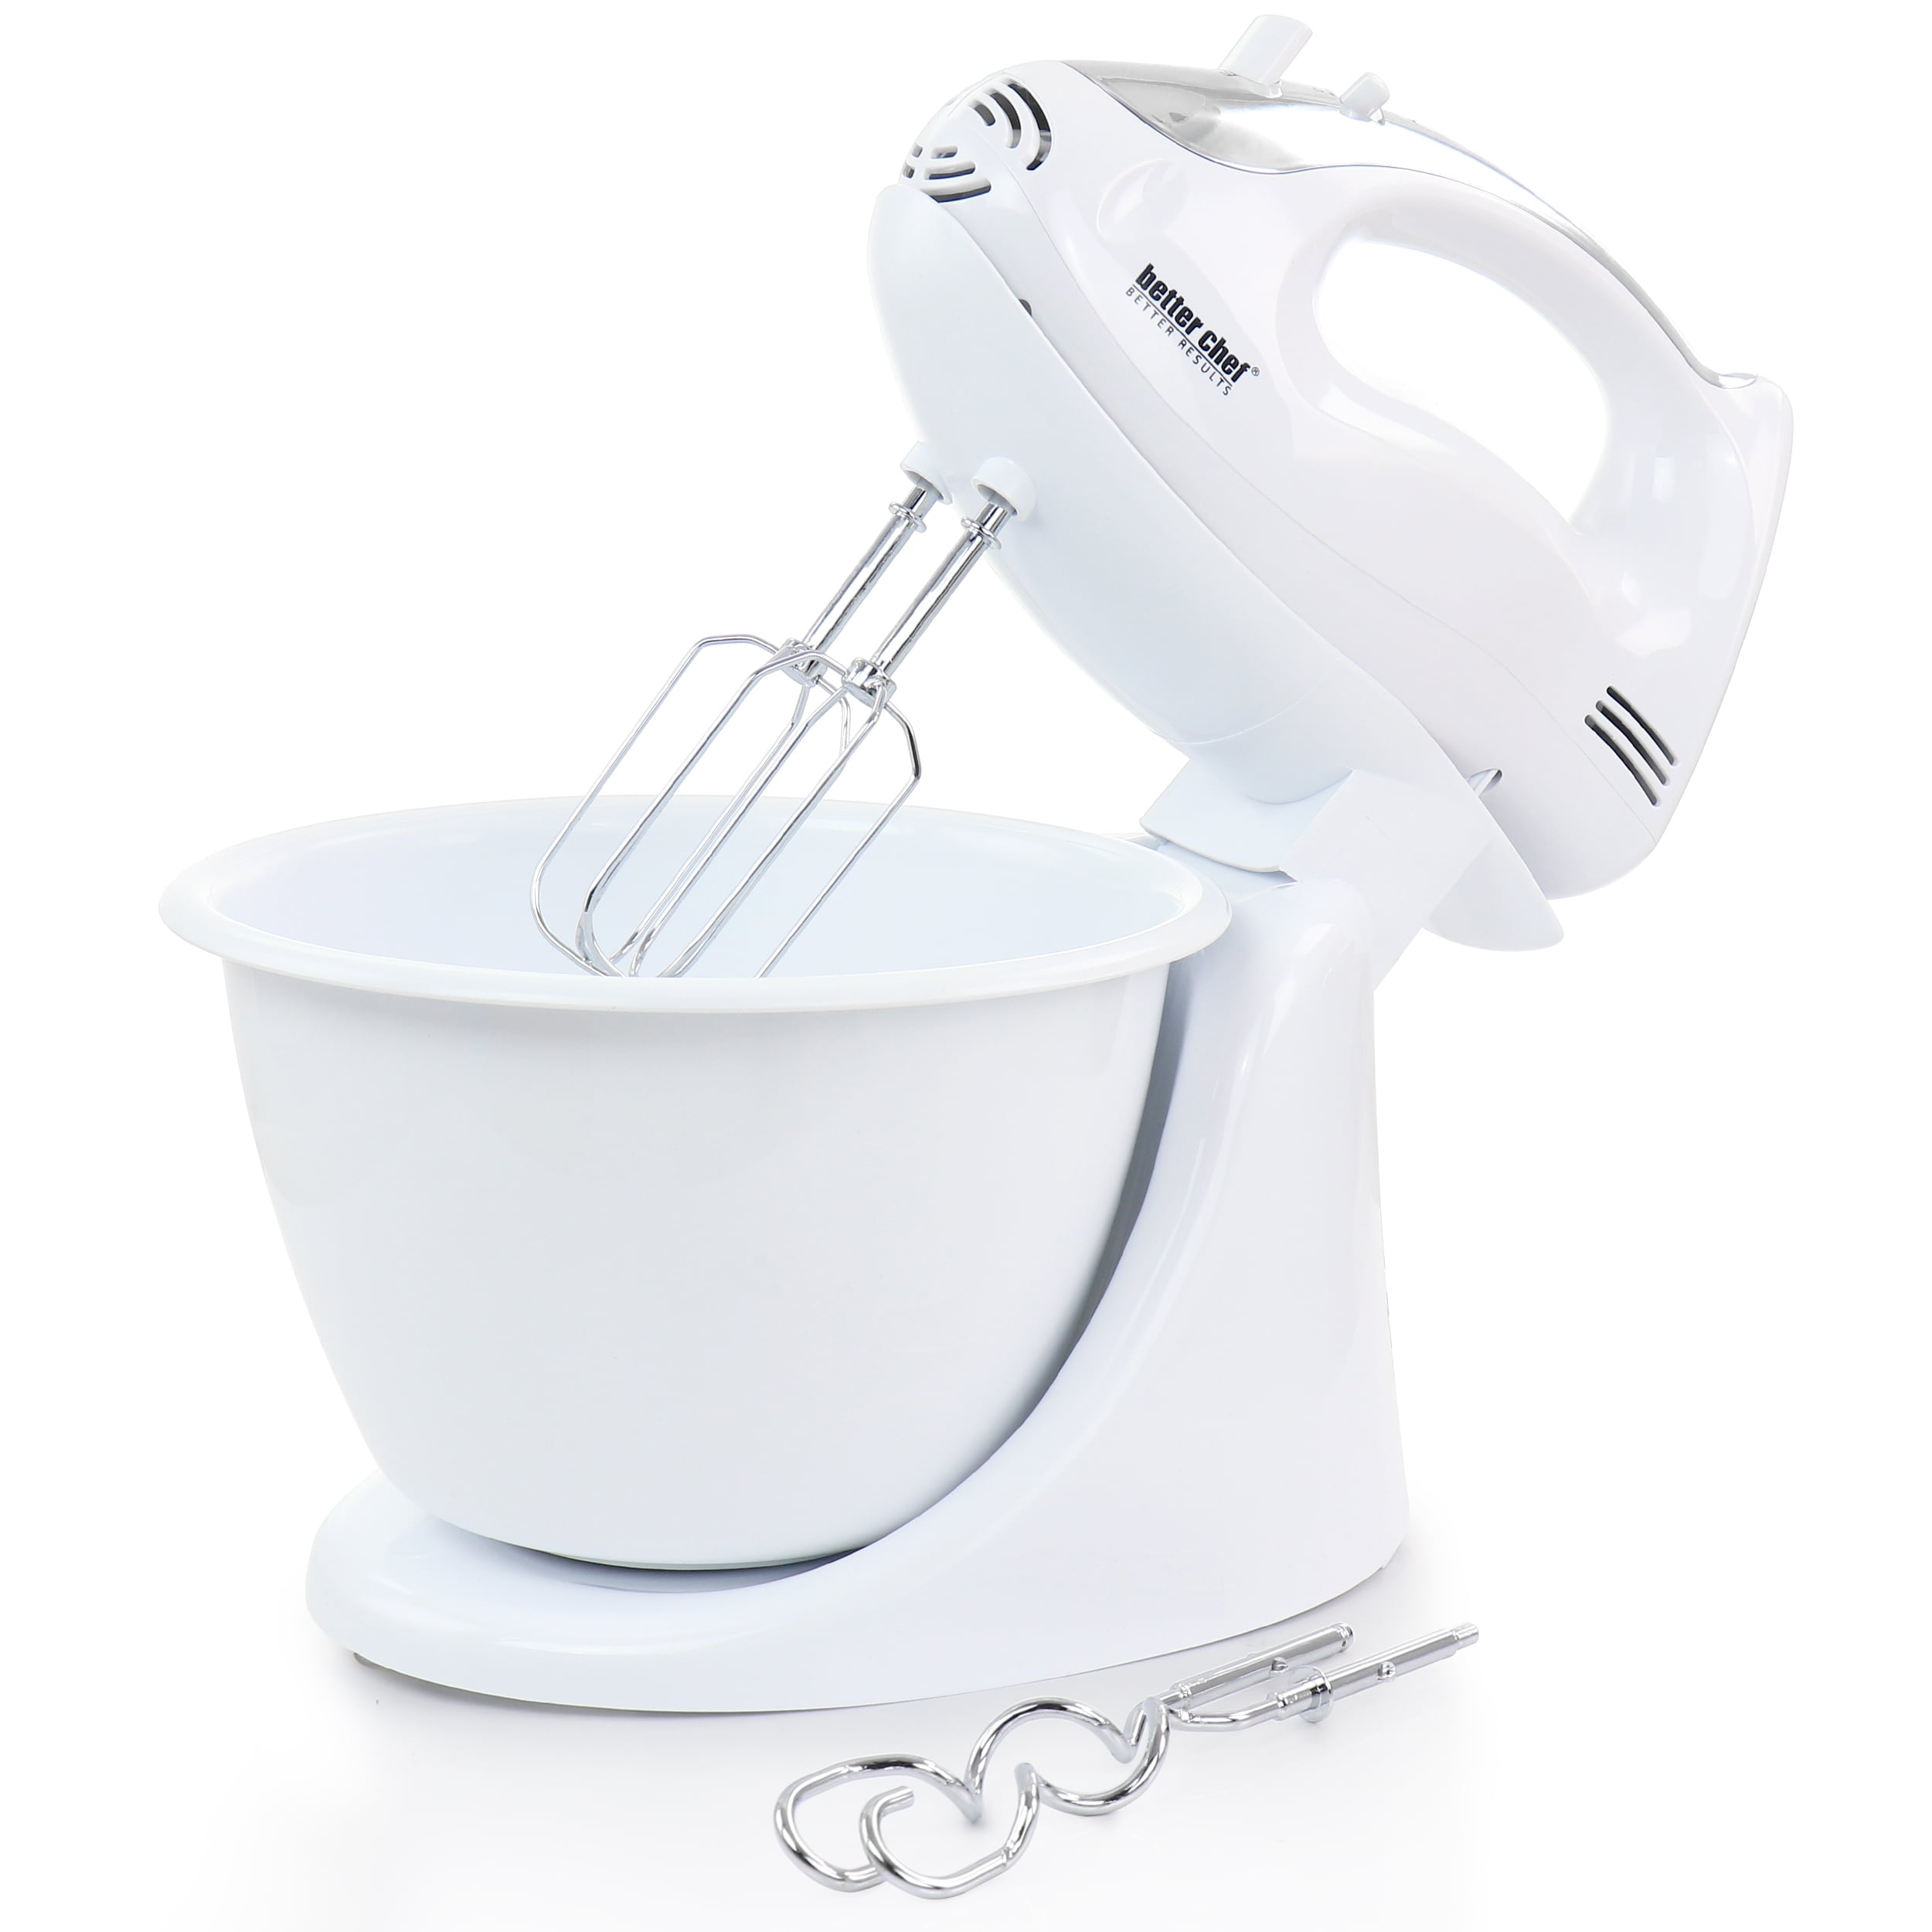 Mixdaddy Automatic Stirrer Hands-free Mixer Great for Chefs Moms Cooks  Recipes Non-stick Pan Stirrer Cooking Dinner Kitchenware Appliance 